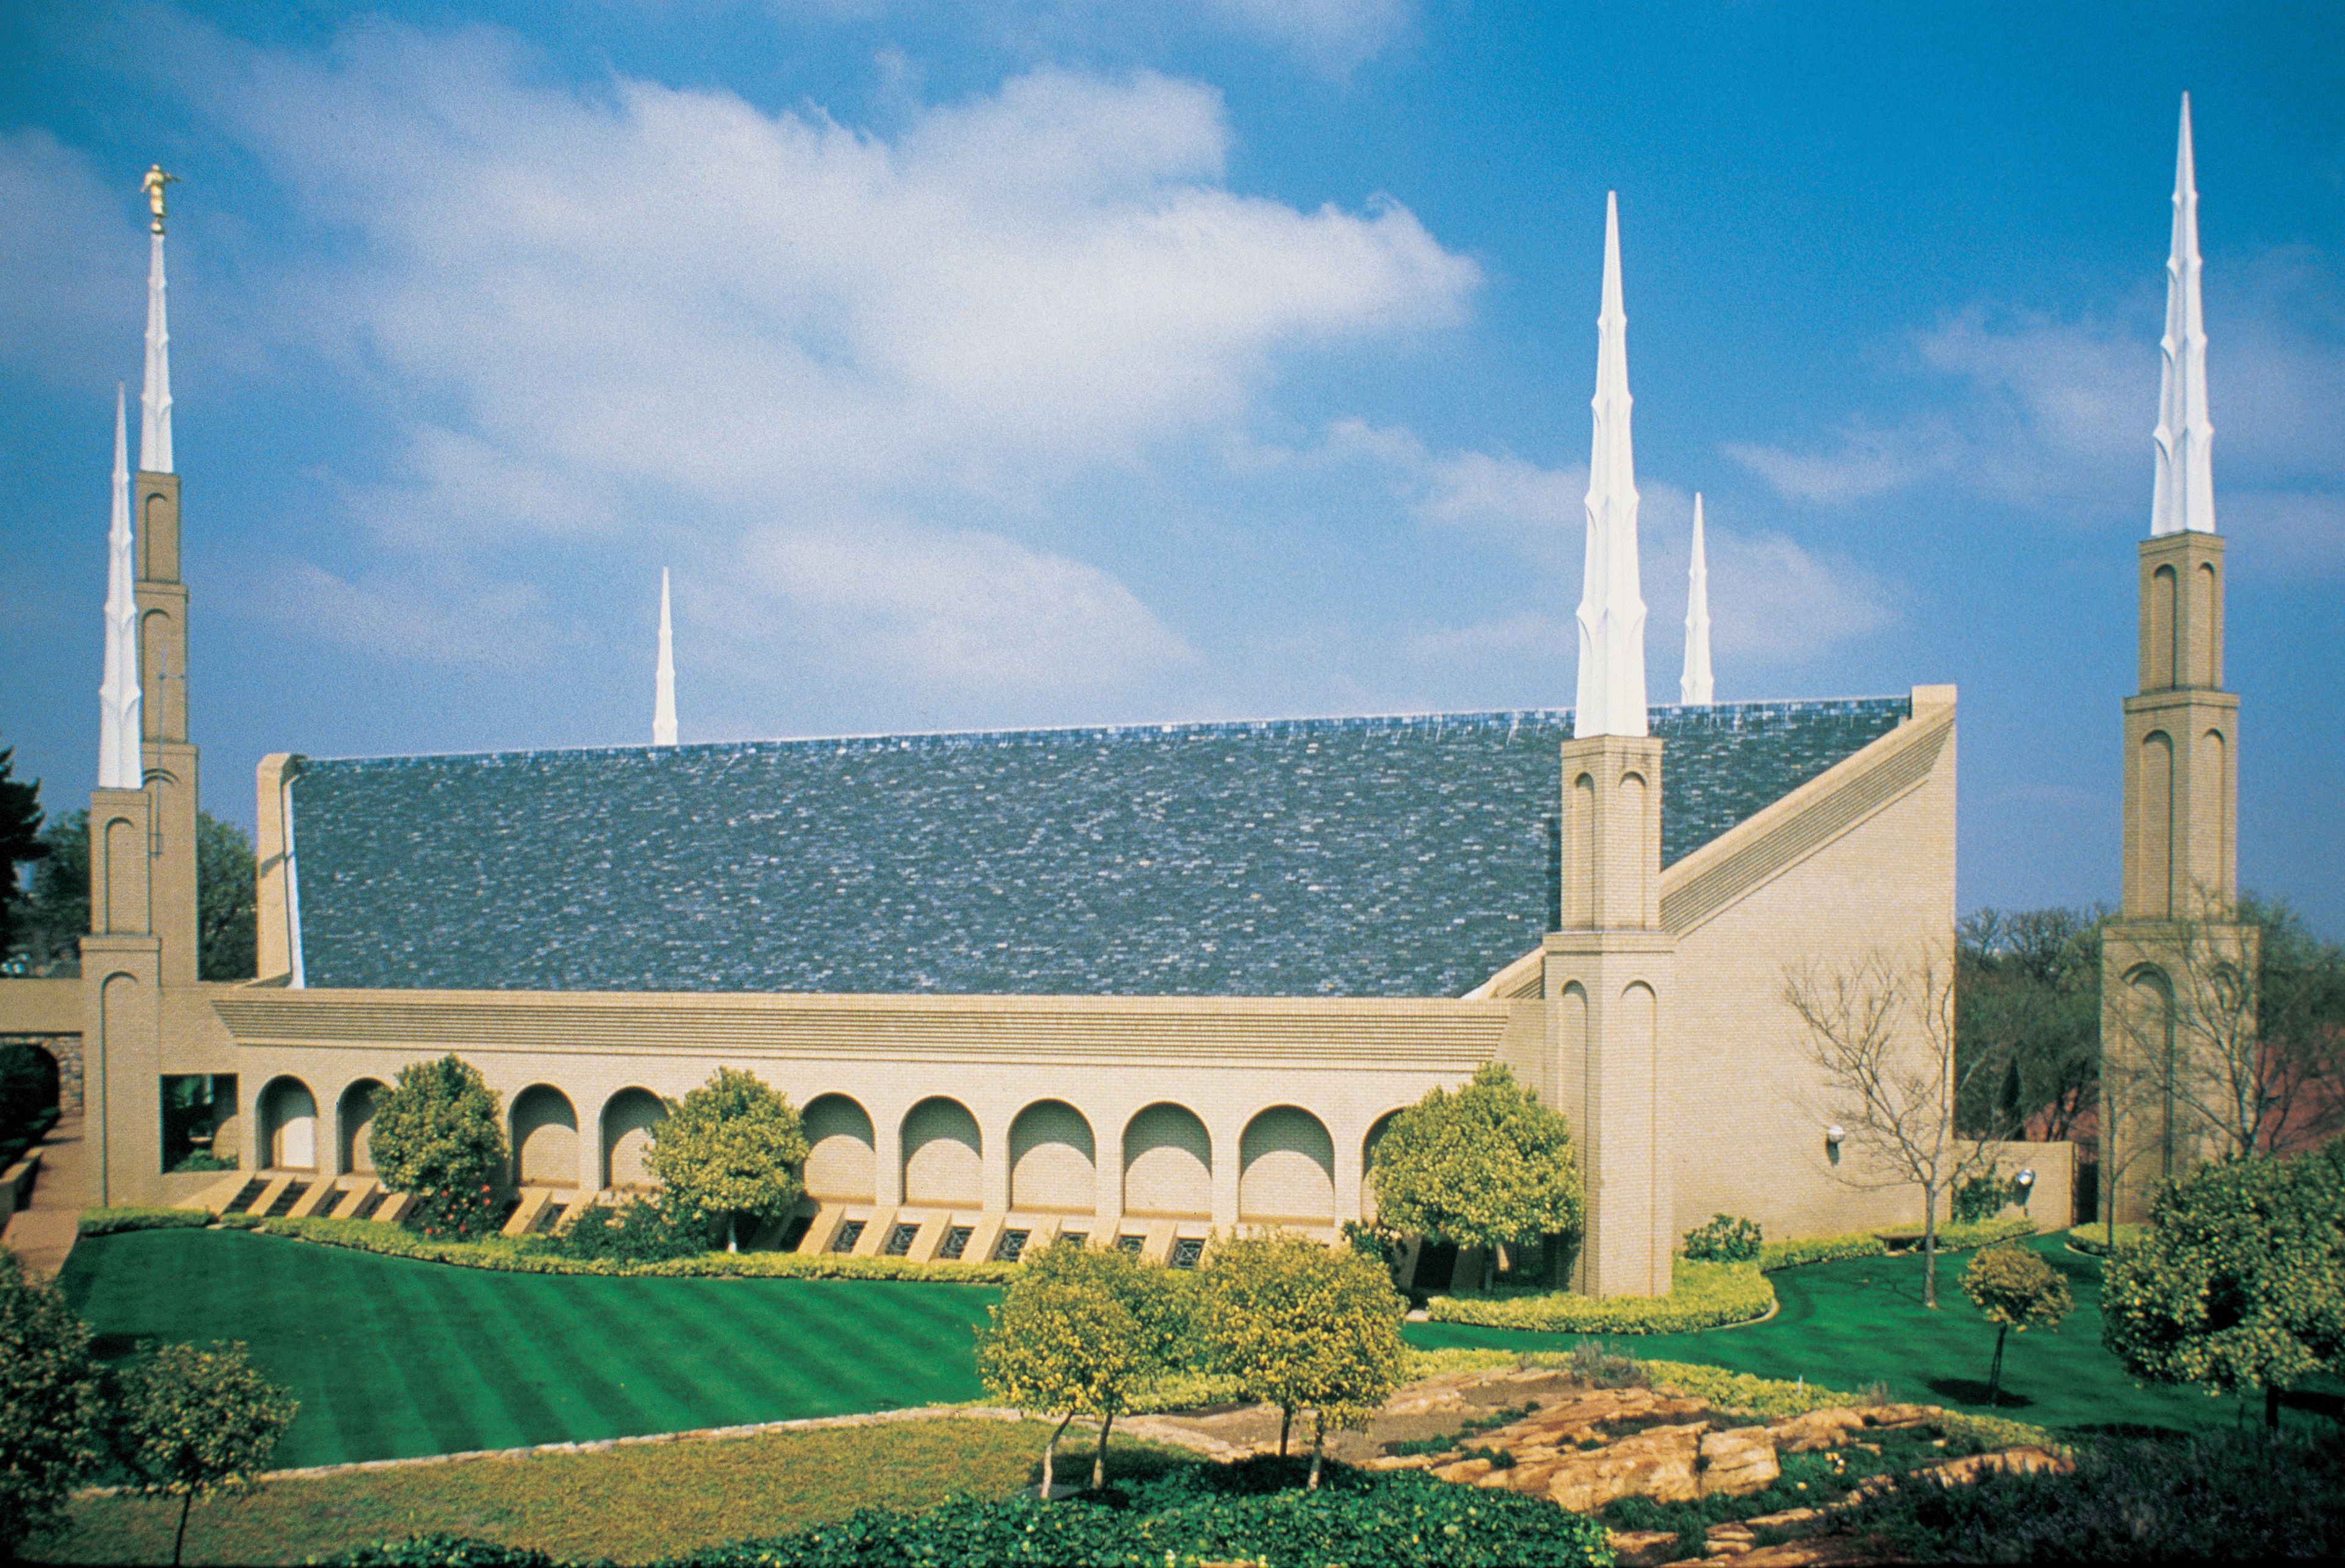 The Johannesburg South Africa Temple view, including scenery.